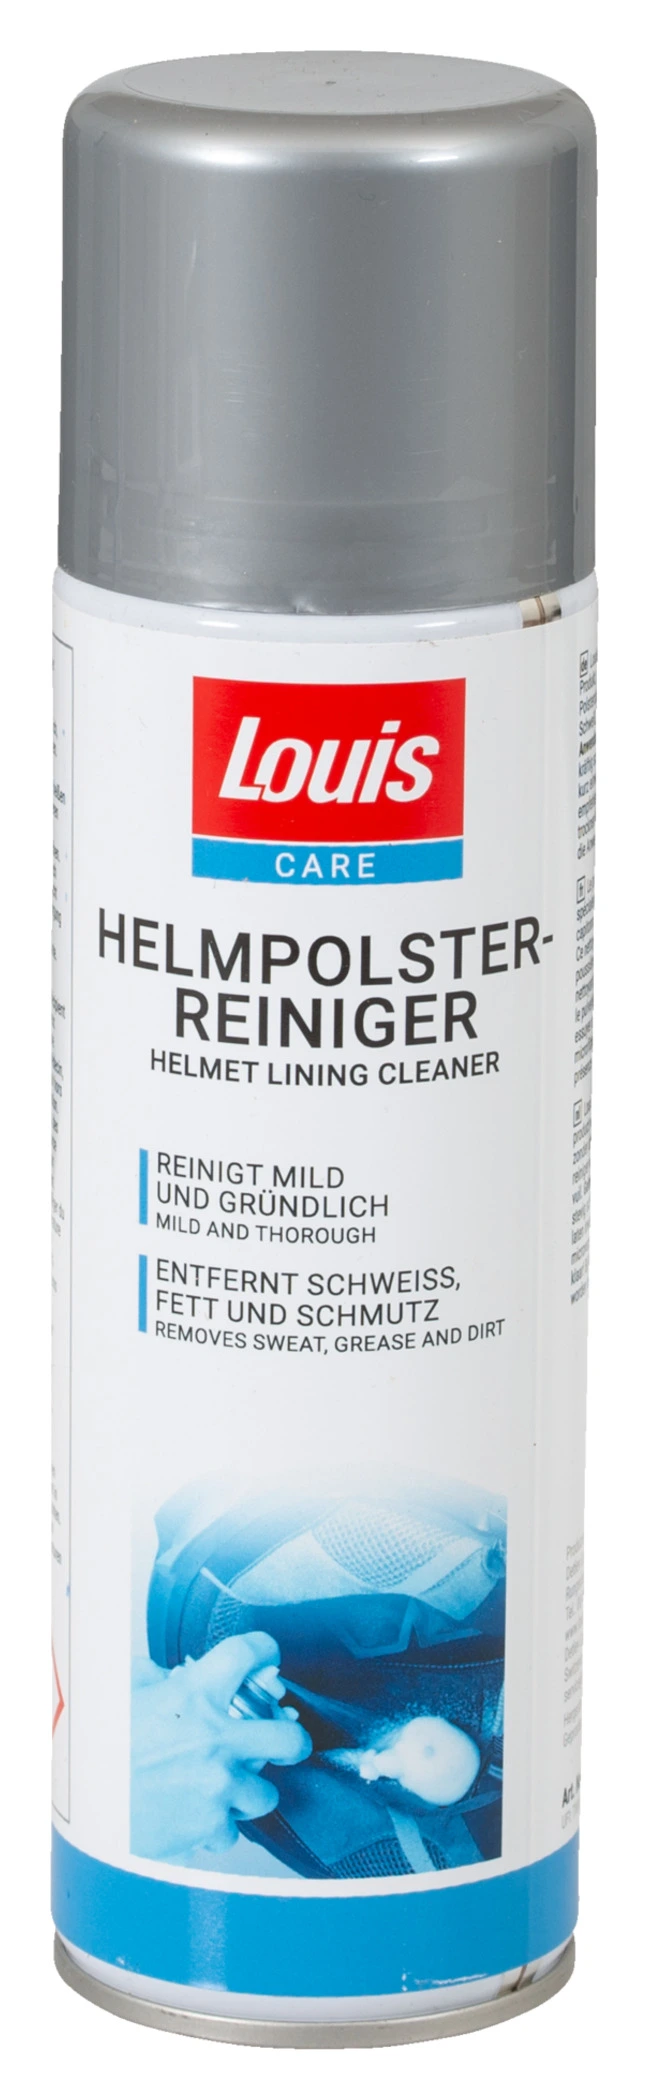 LOUIS CARE HELMPOLSTER-